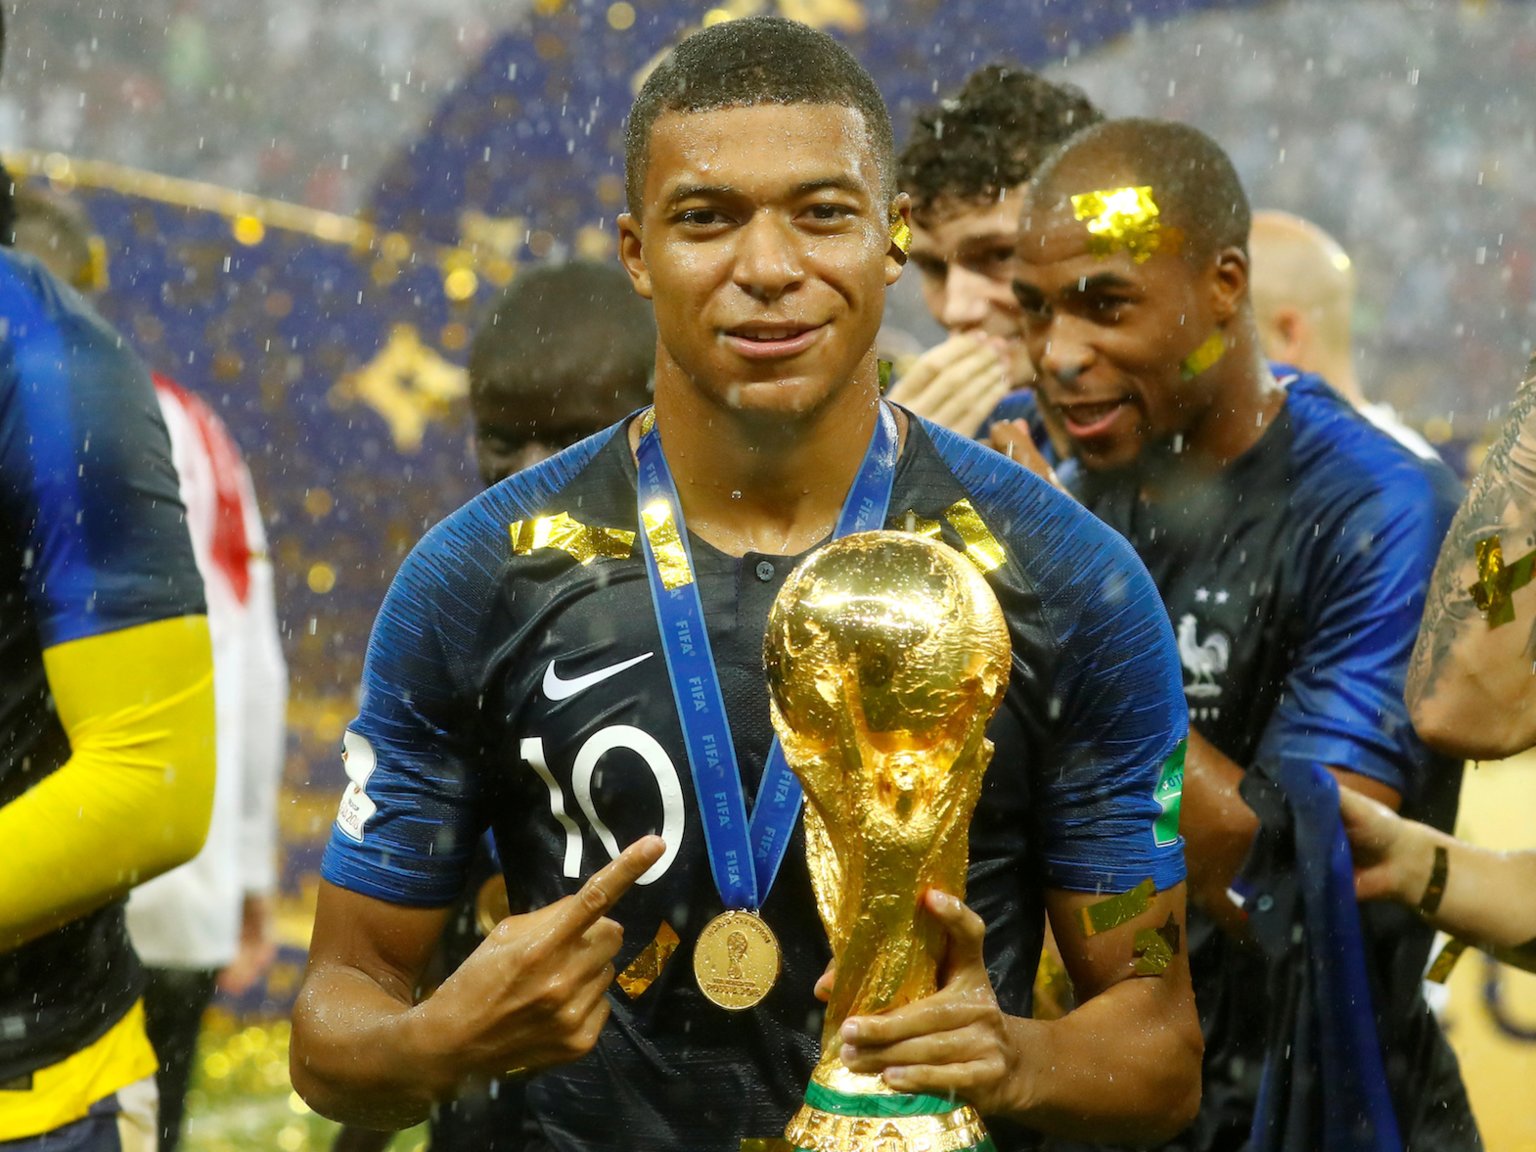 Frances-Young-Soccer-Star-Donates-His-First-World-Cup-Winnings-to-Charity